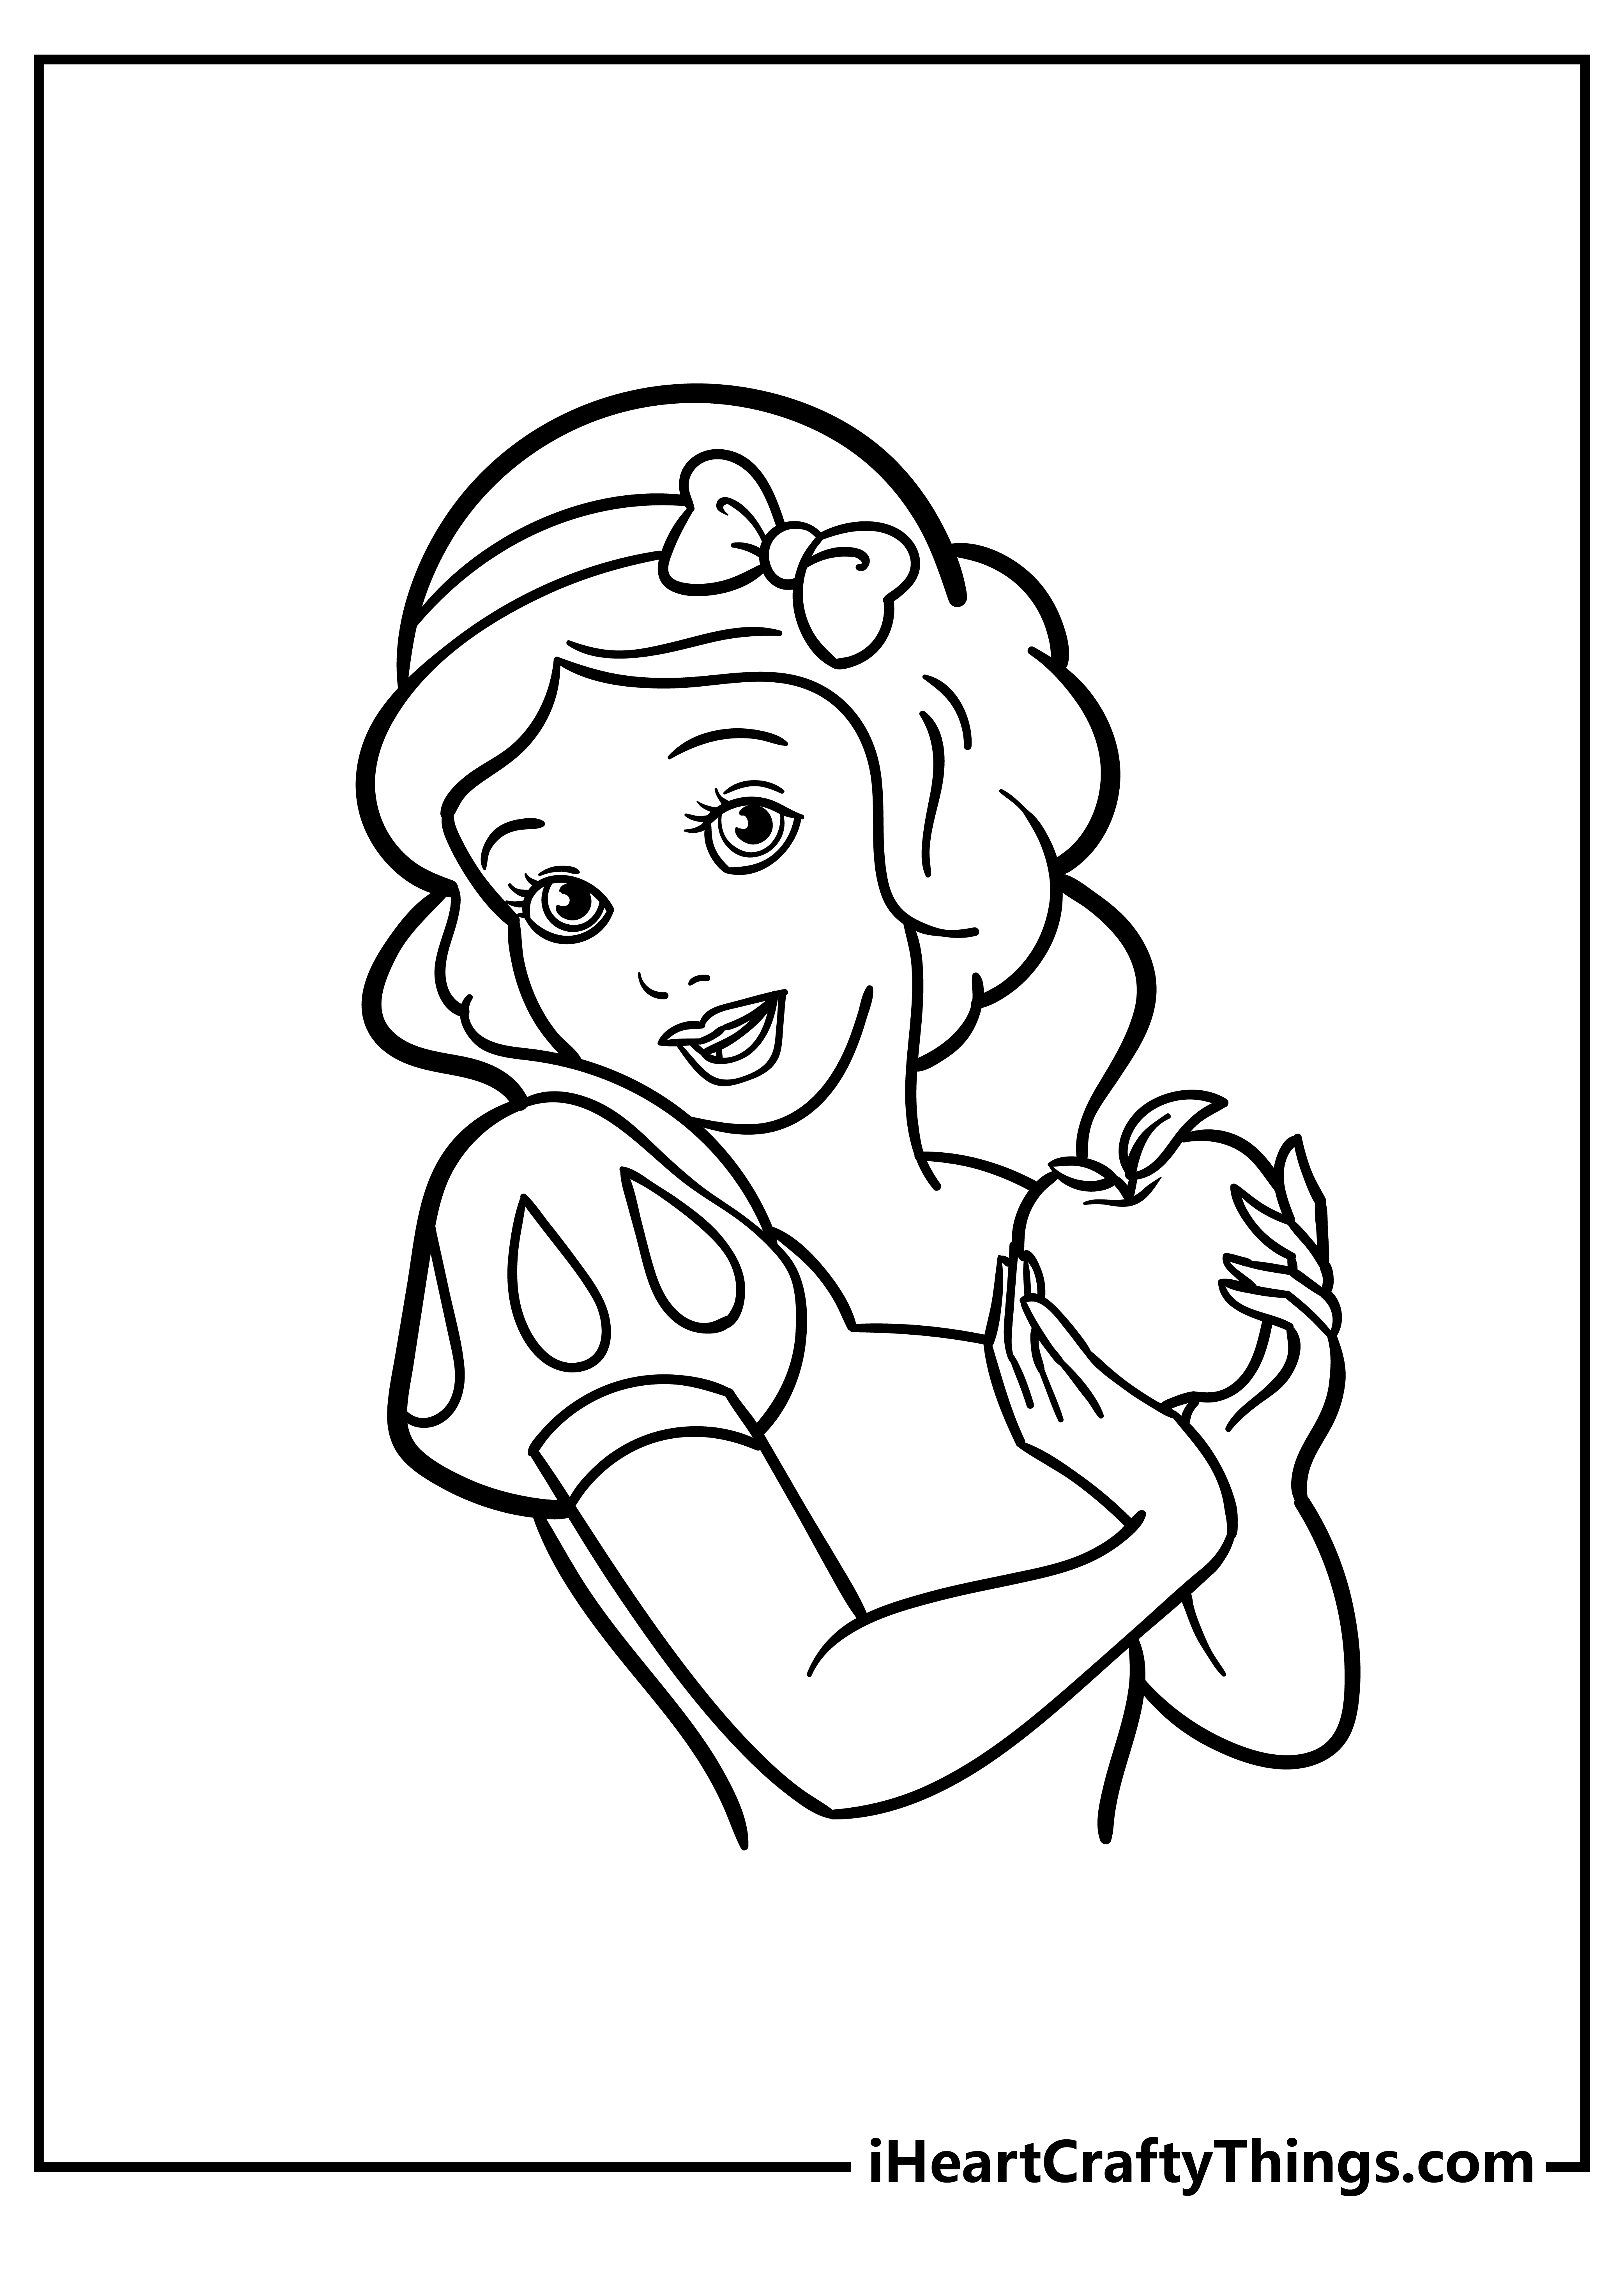 Printable Snow White Coloring Pages Updated 21